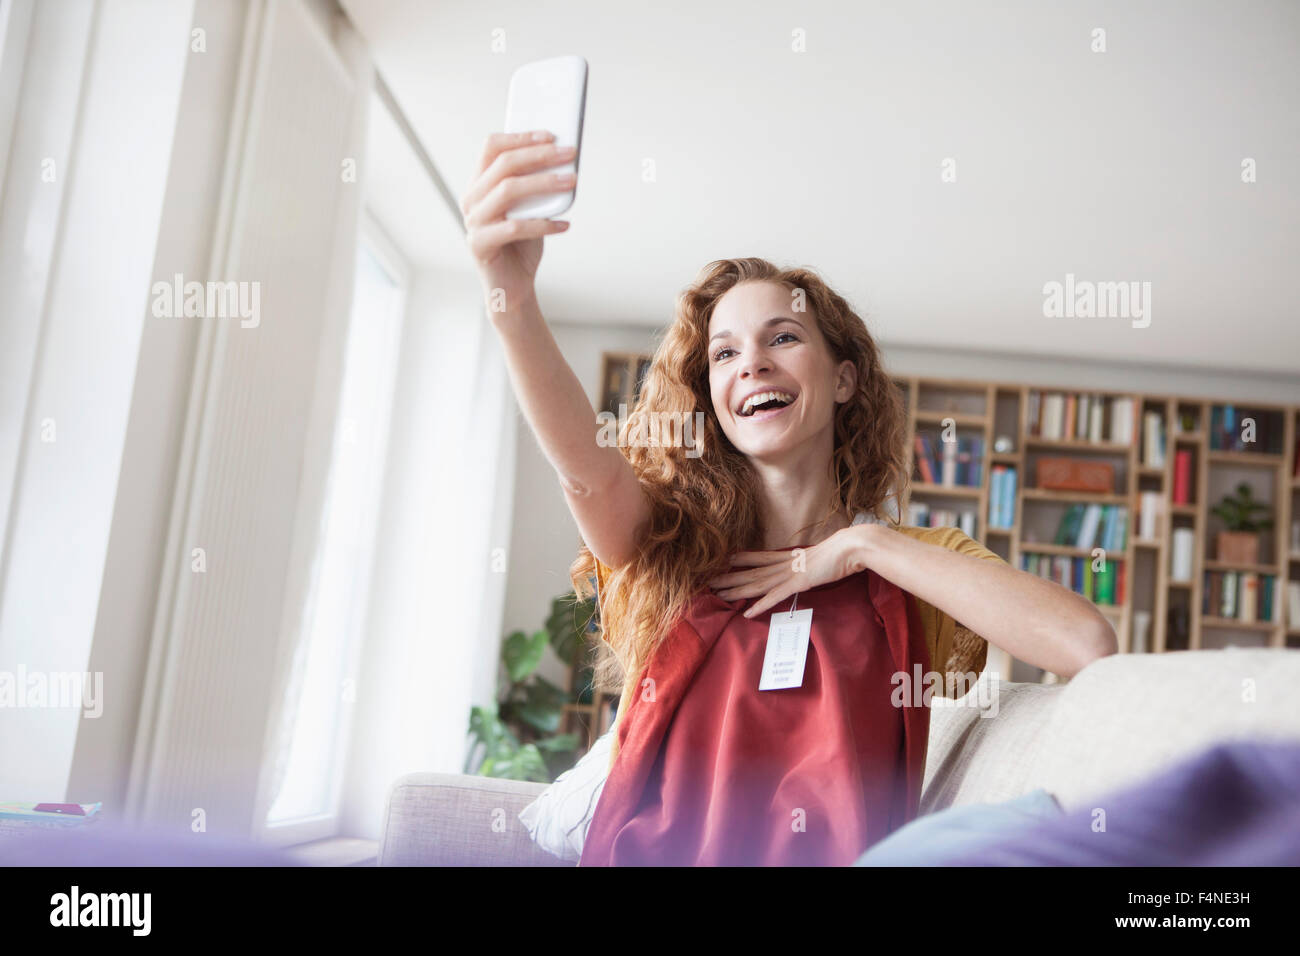 Happy woman at home taking a selfie with new garment Stock Photo